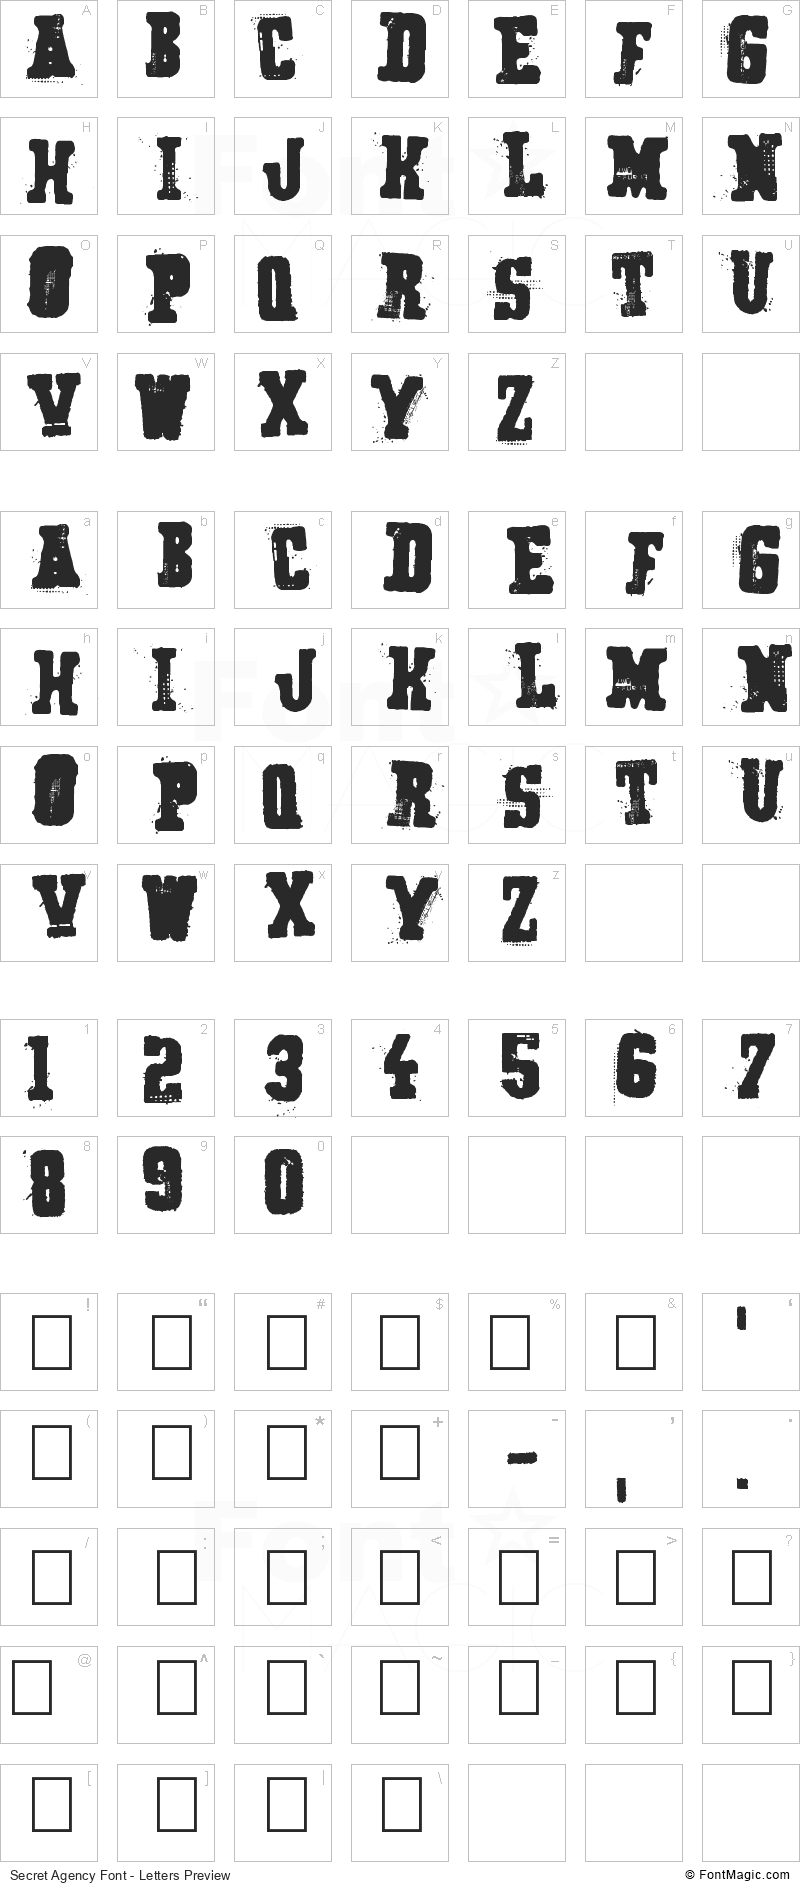 Secret Agency Font - All Latters Preview Chart